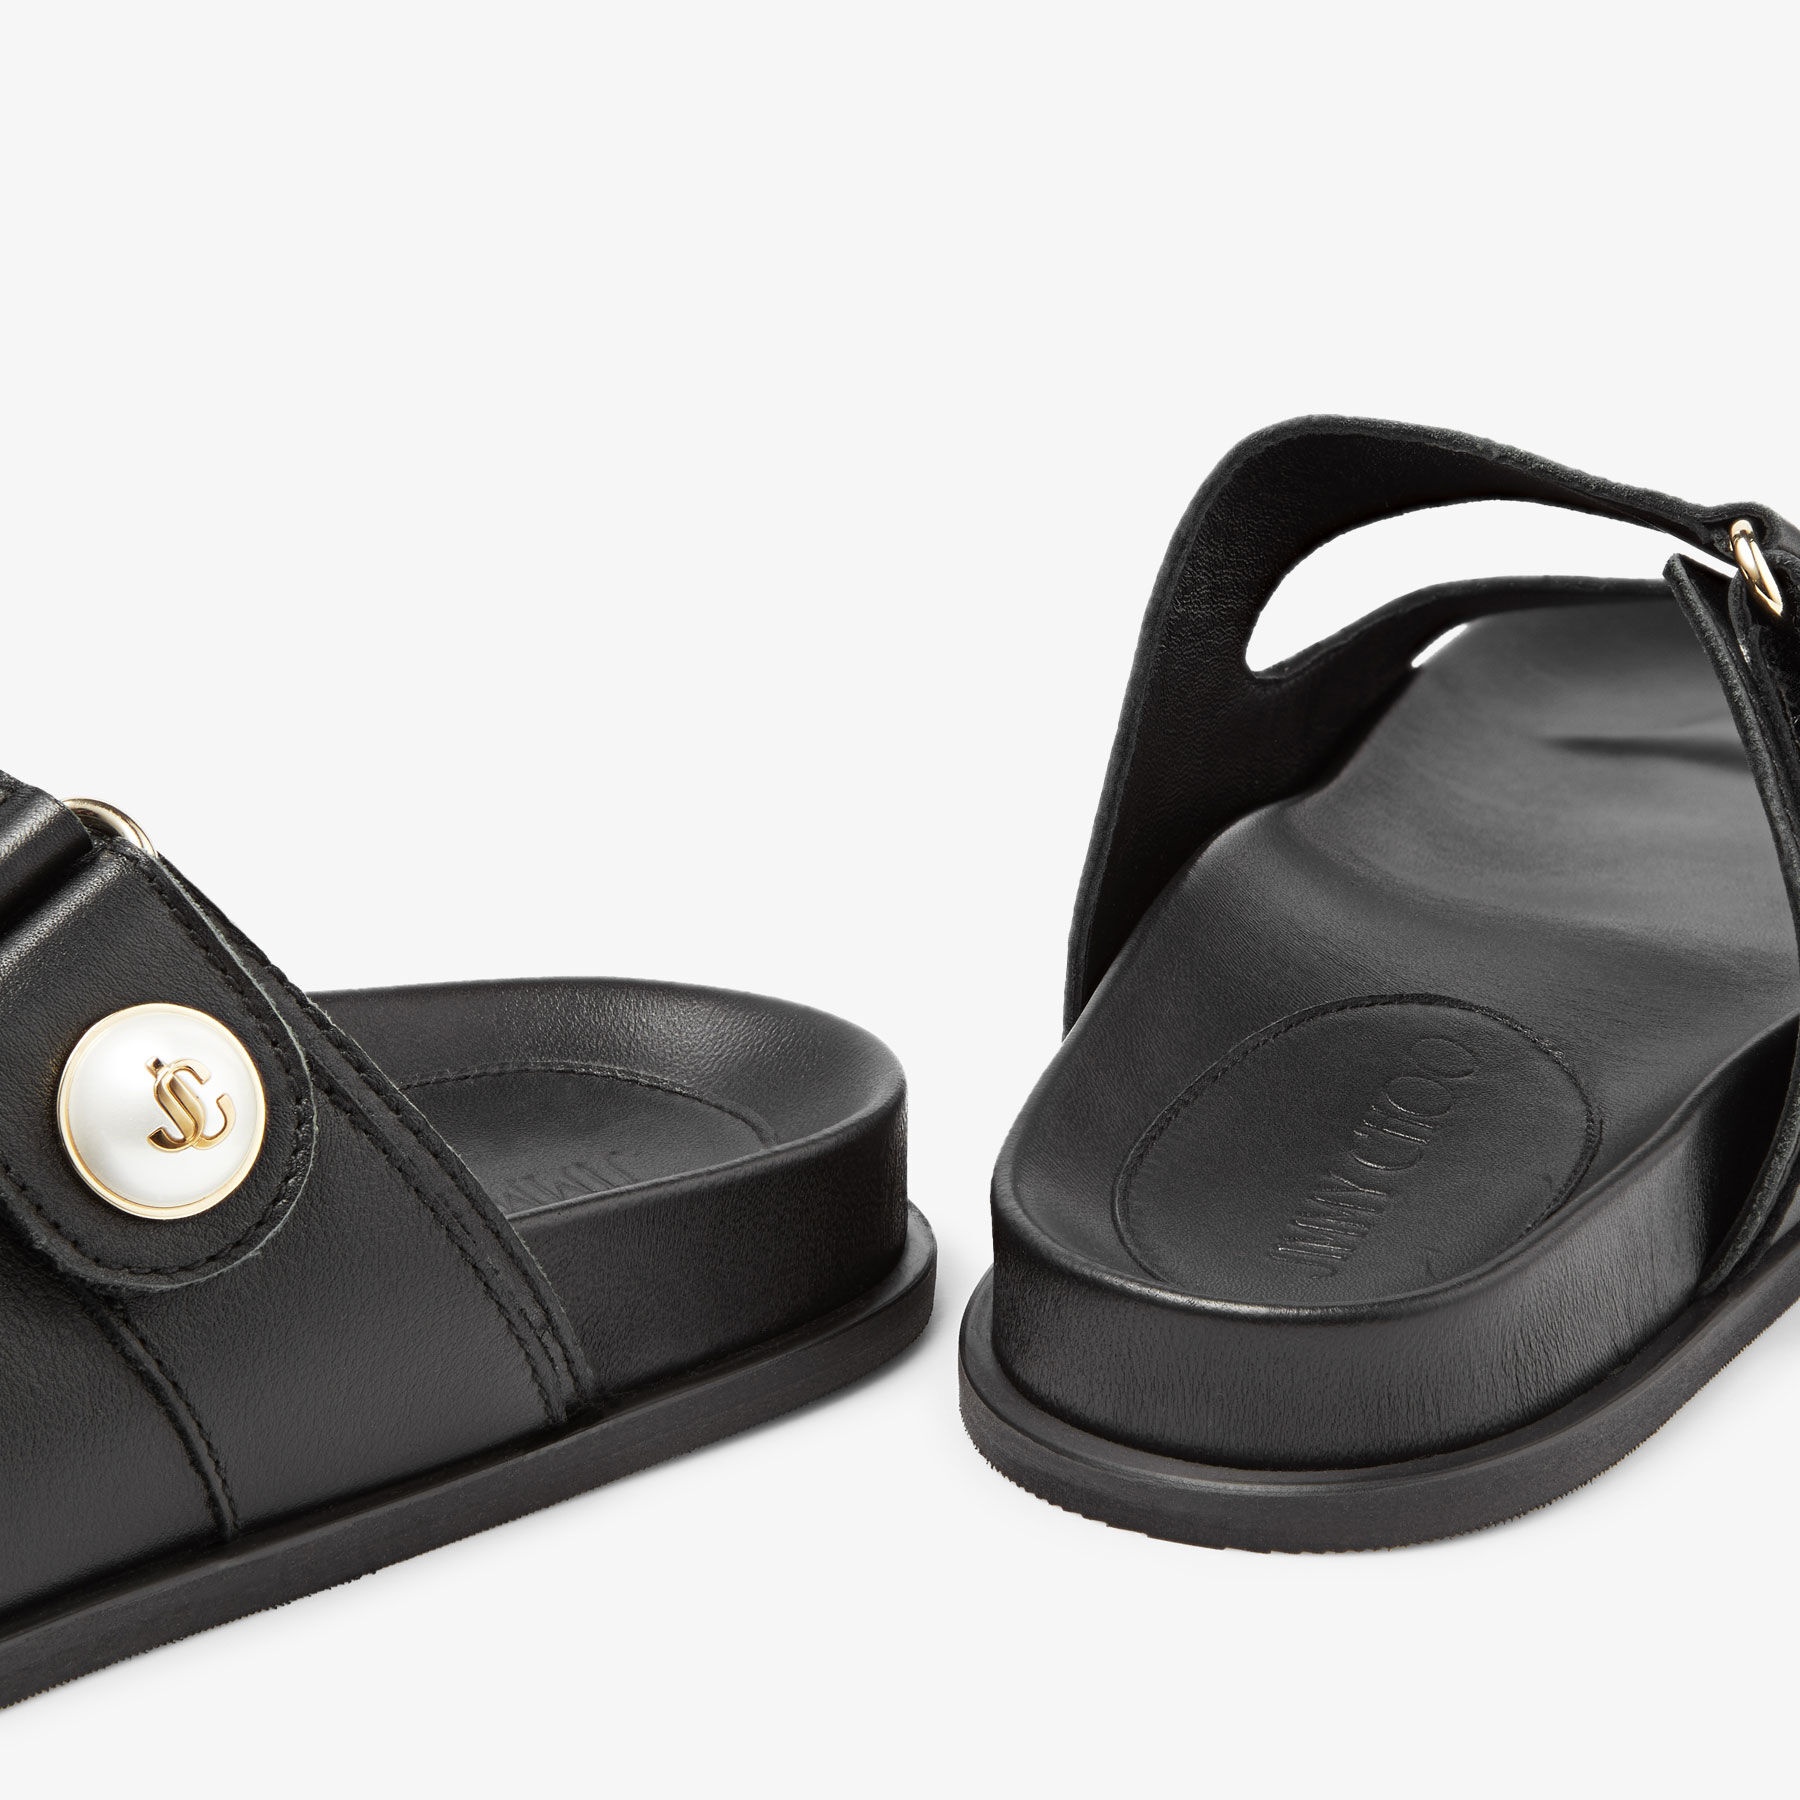 Fayence Sandal
Black Leather Flat Sandals with Pearl Embellishment - 4